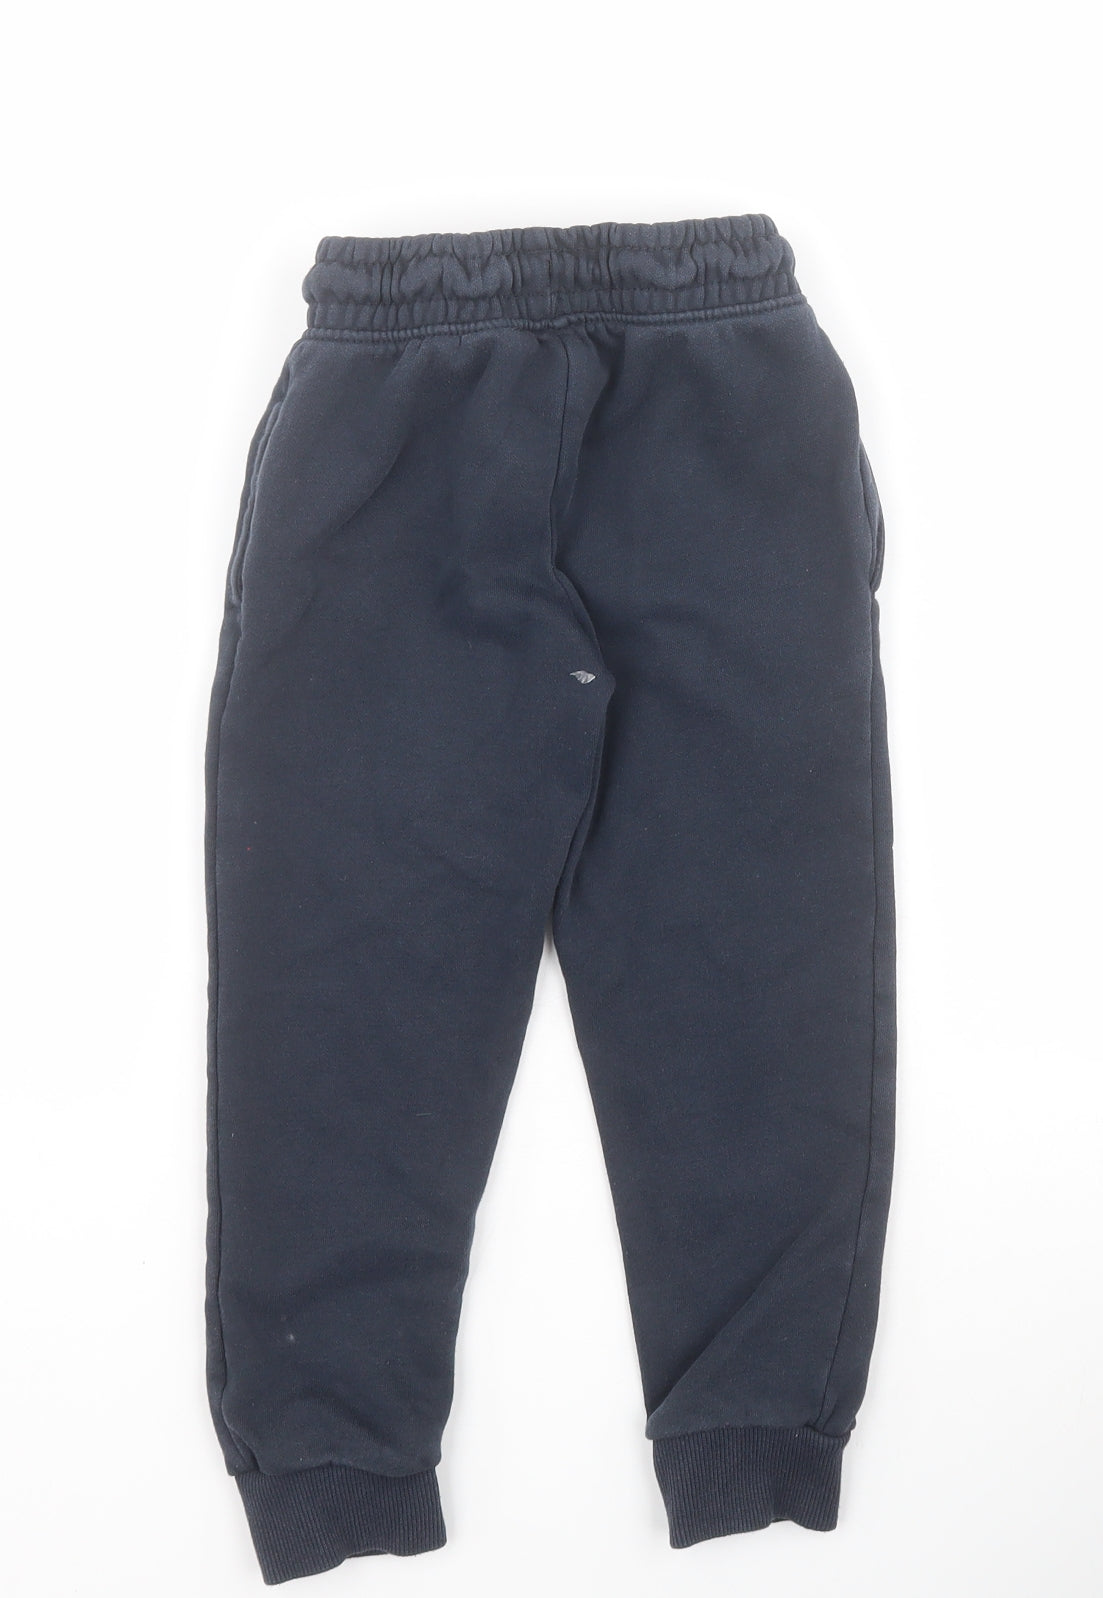 Dunnes Boys Blue  Cotton Jogger Trousers Size 5 Years  Regular Drawstring